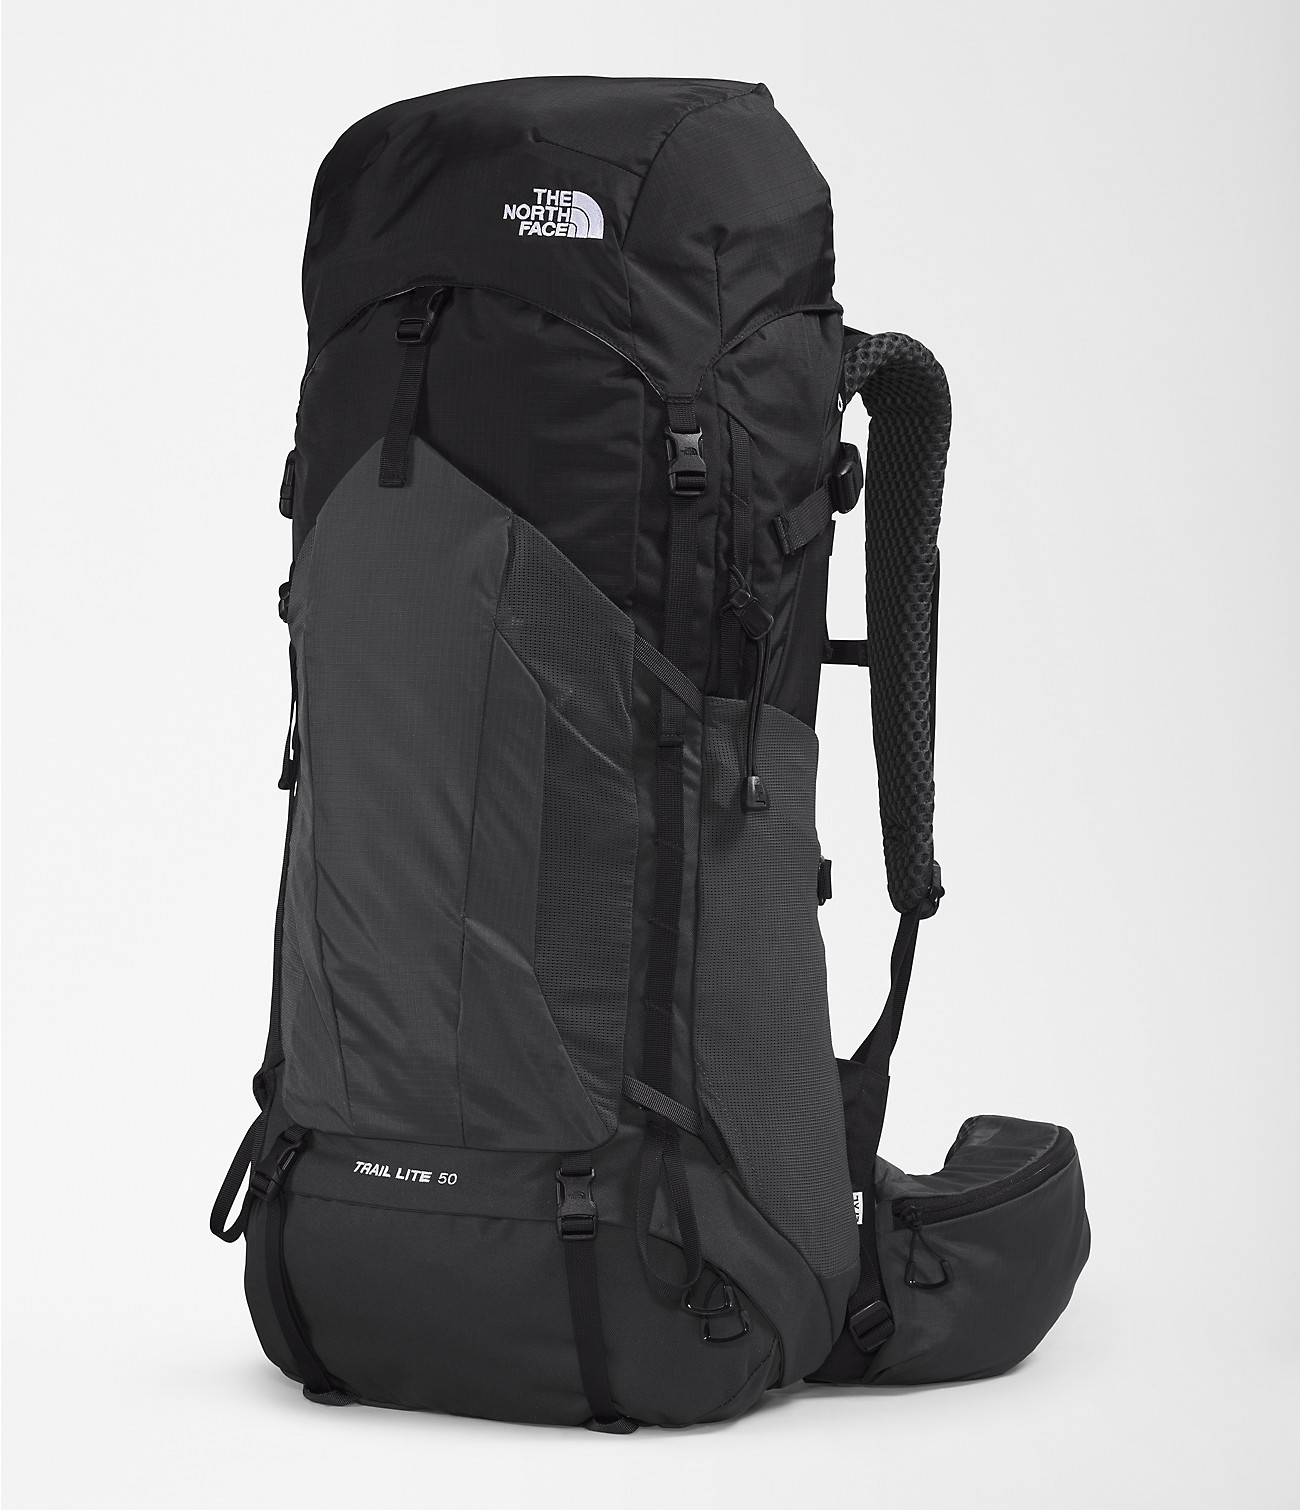 Unlock Wilderness' choice in the North Face Vs Quecha comparison, the Trail Lite 50 Backpack by The North Face